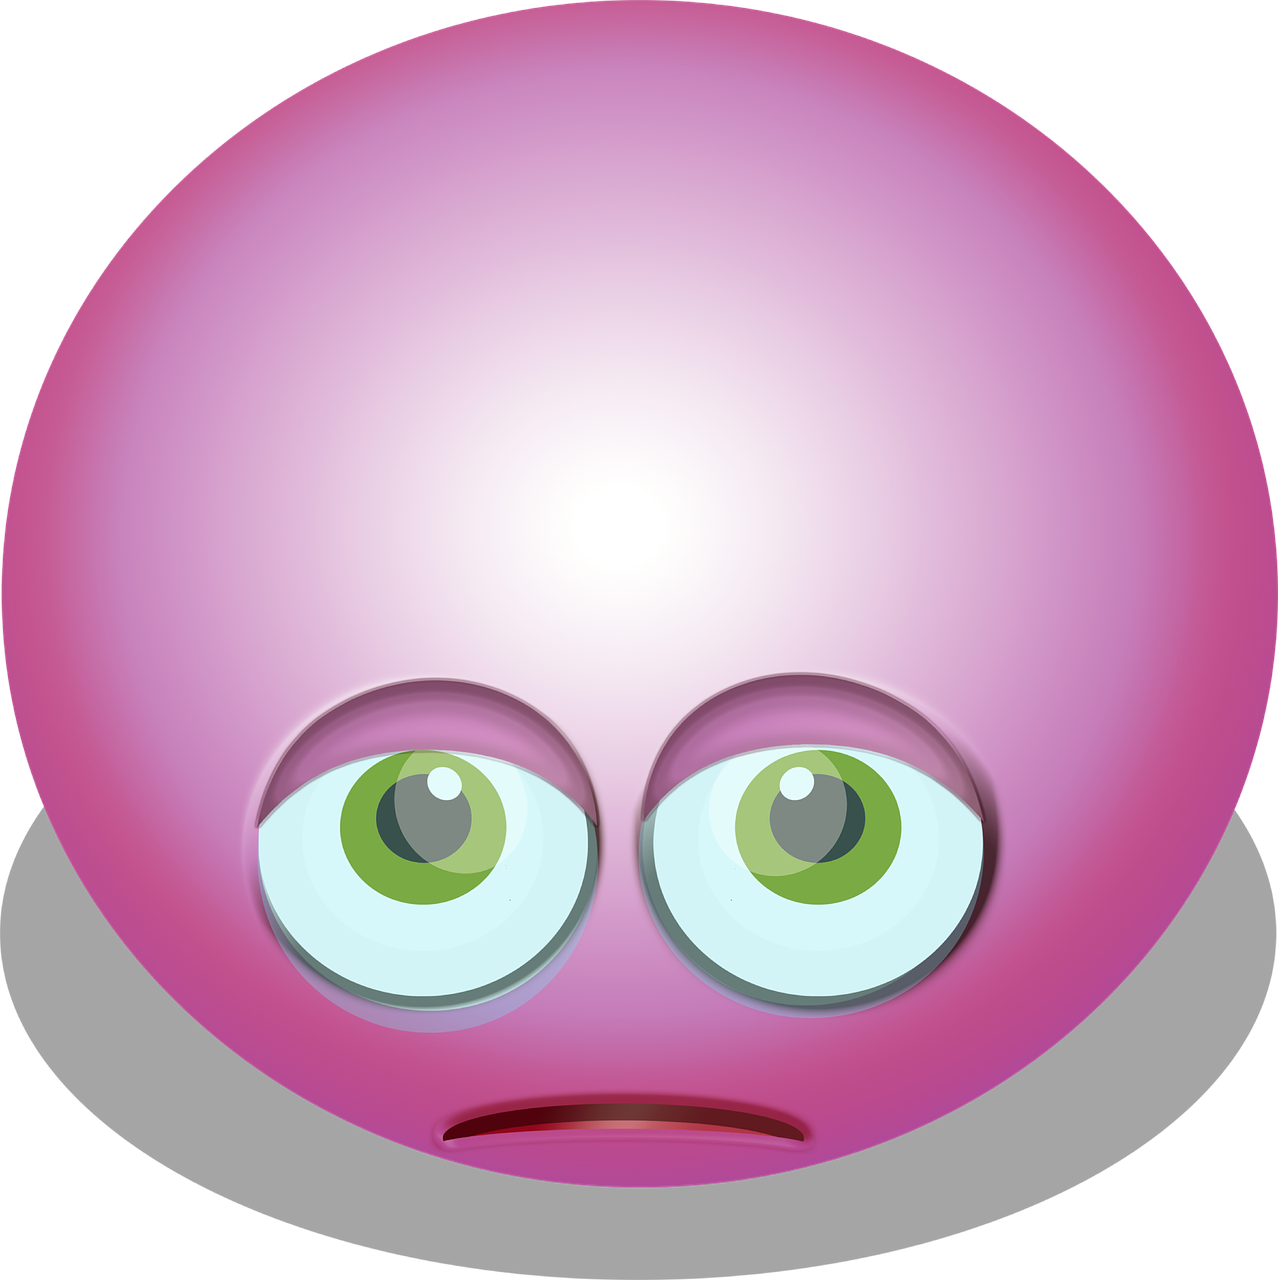 a pink smiley face with green eyes, a digital rendering, inspired by INO, disgusted. fear inspiring mood, spherical body, cute face. dark fantasy, bottom viewa